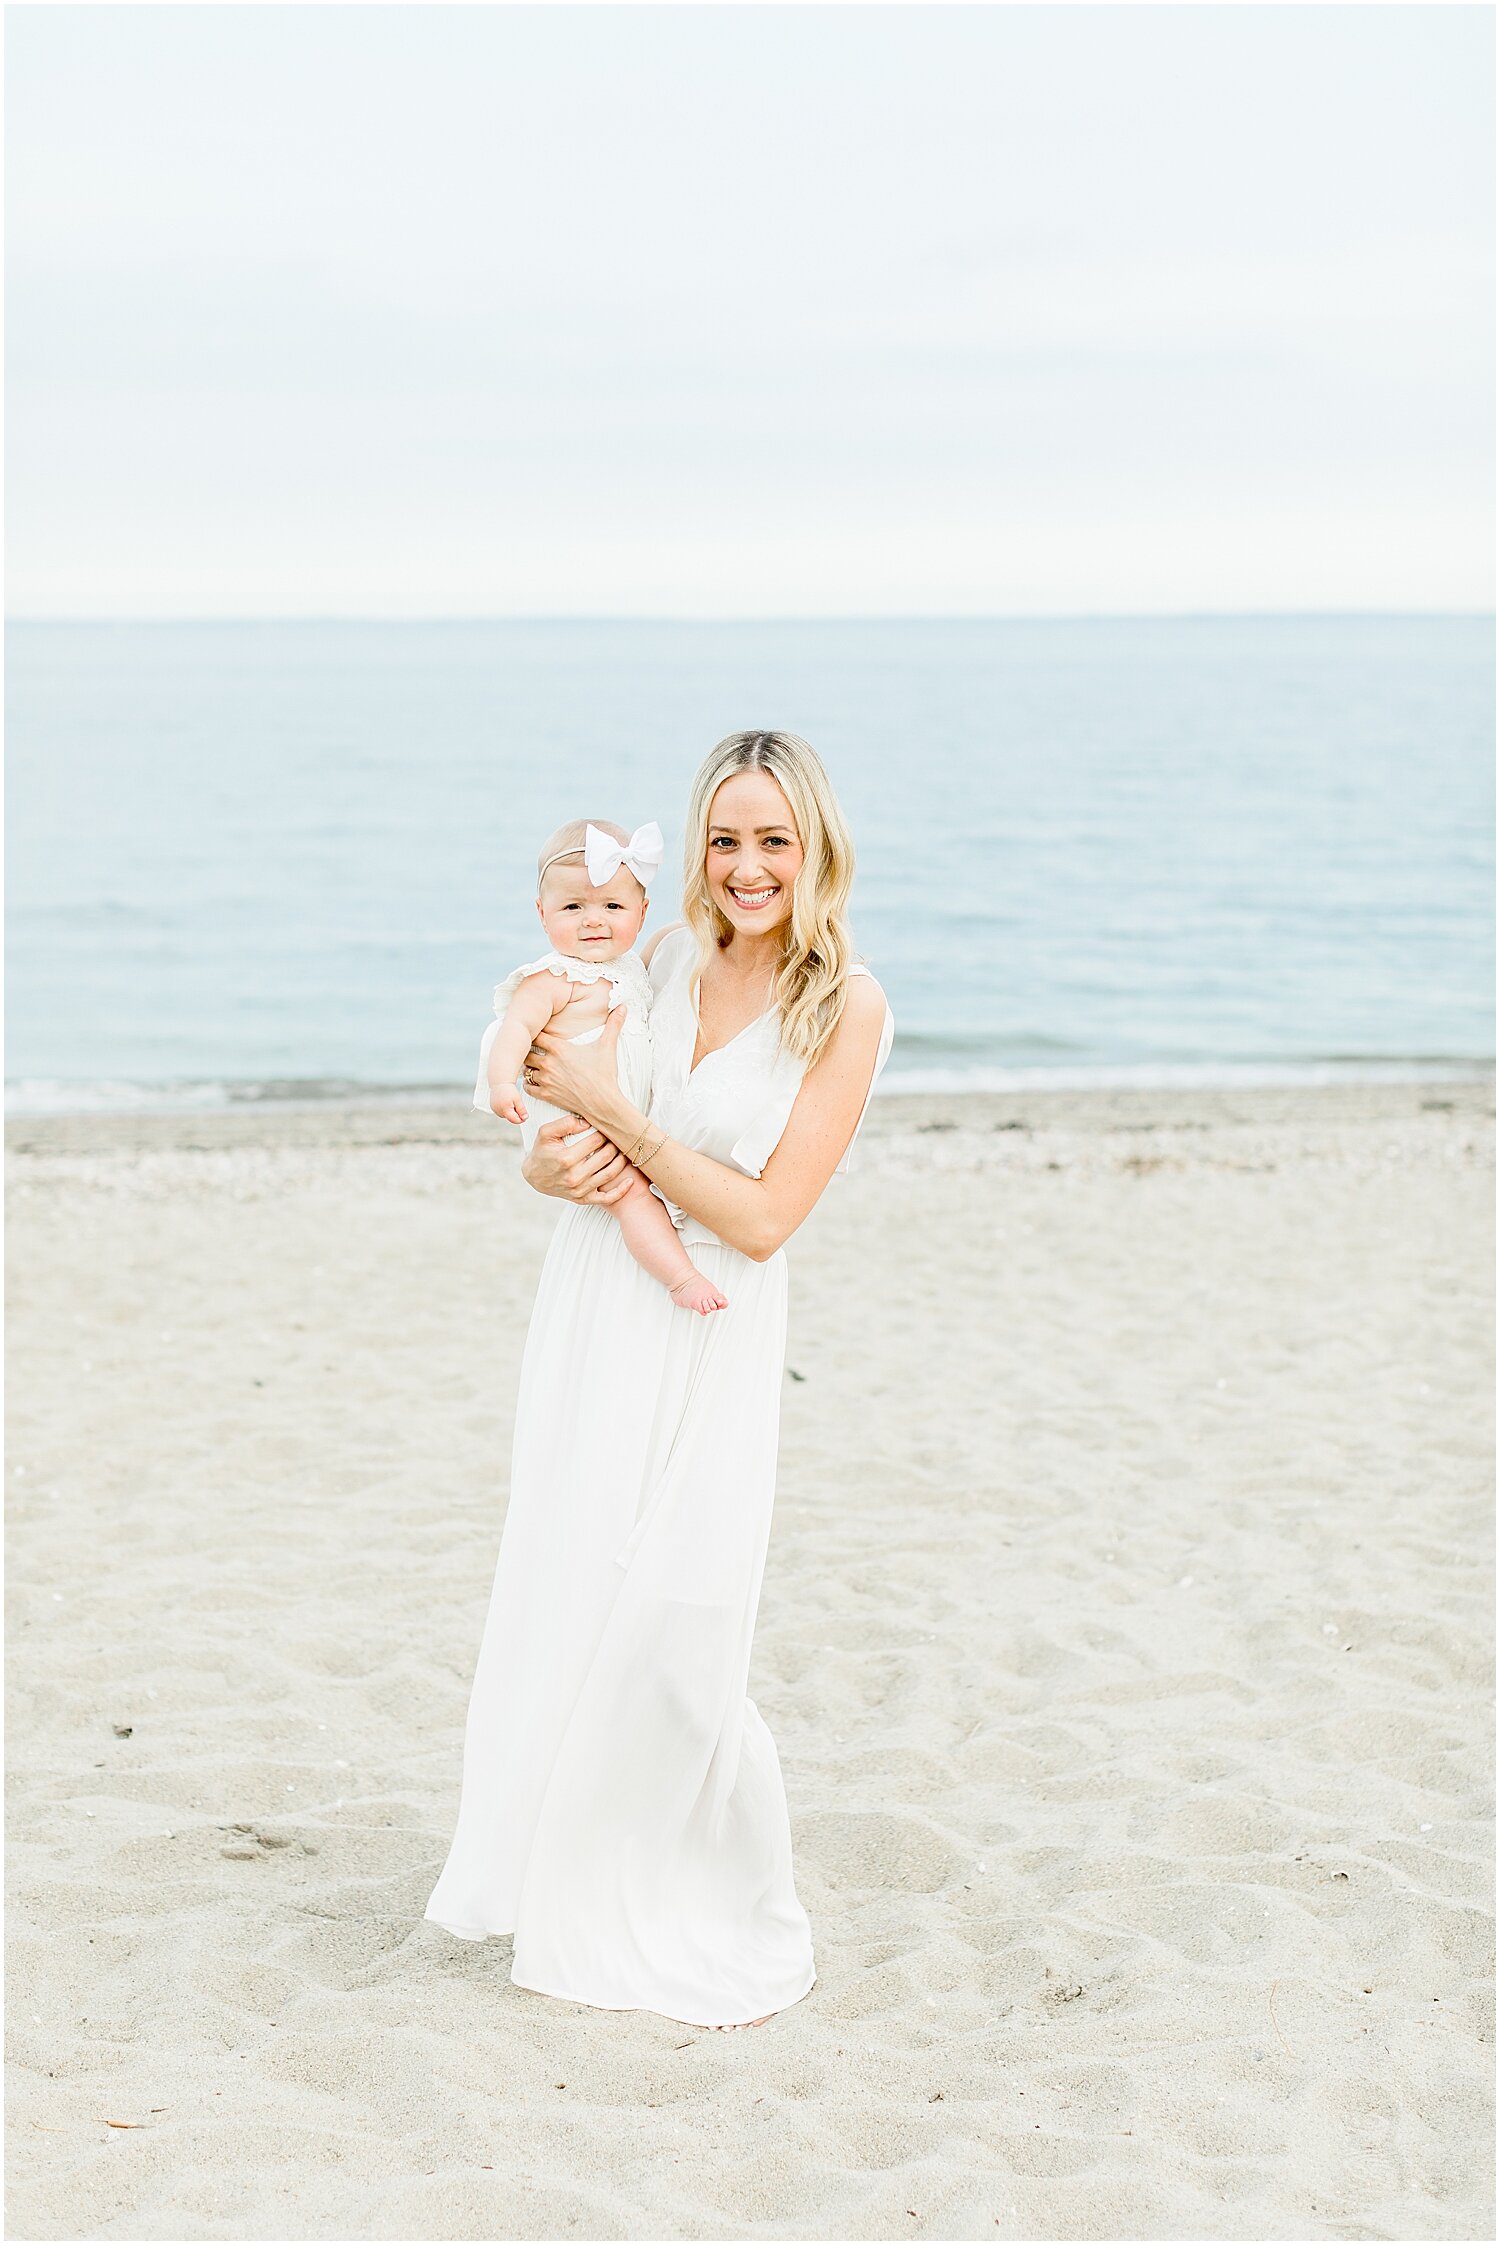 Mama with baby girl at 6 month milestone session on the beach in Westport, CT. Photos by Kristin Wood Photography.